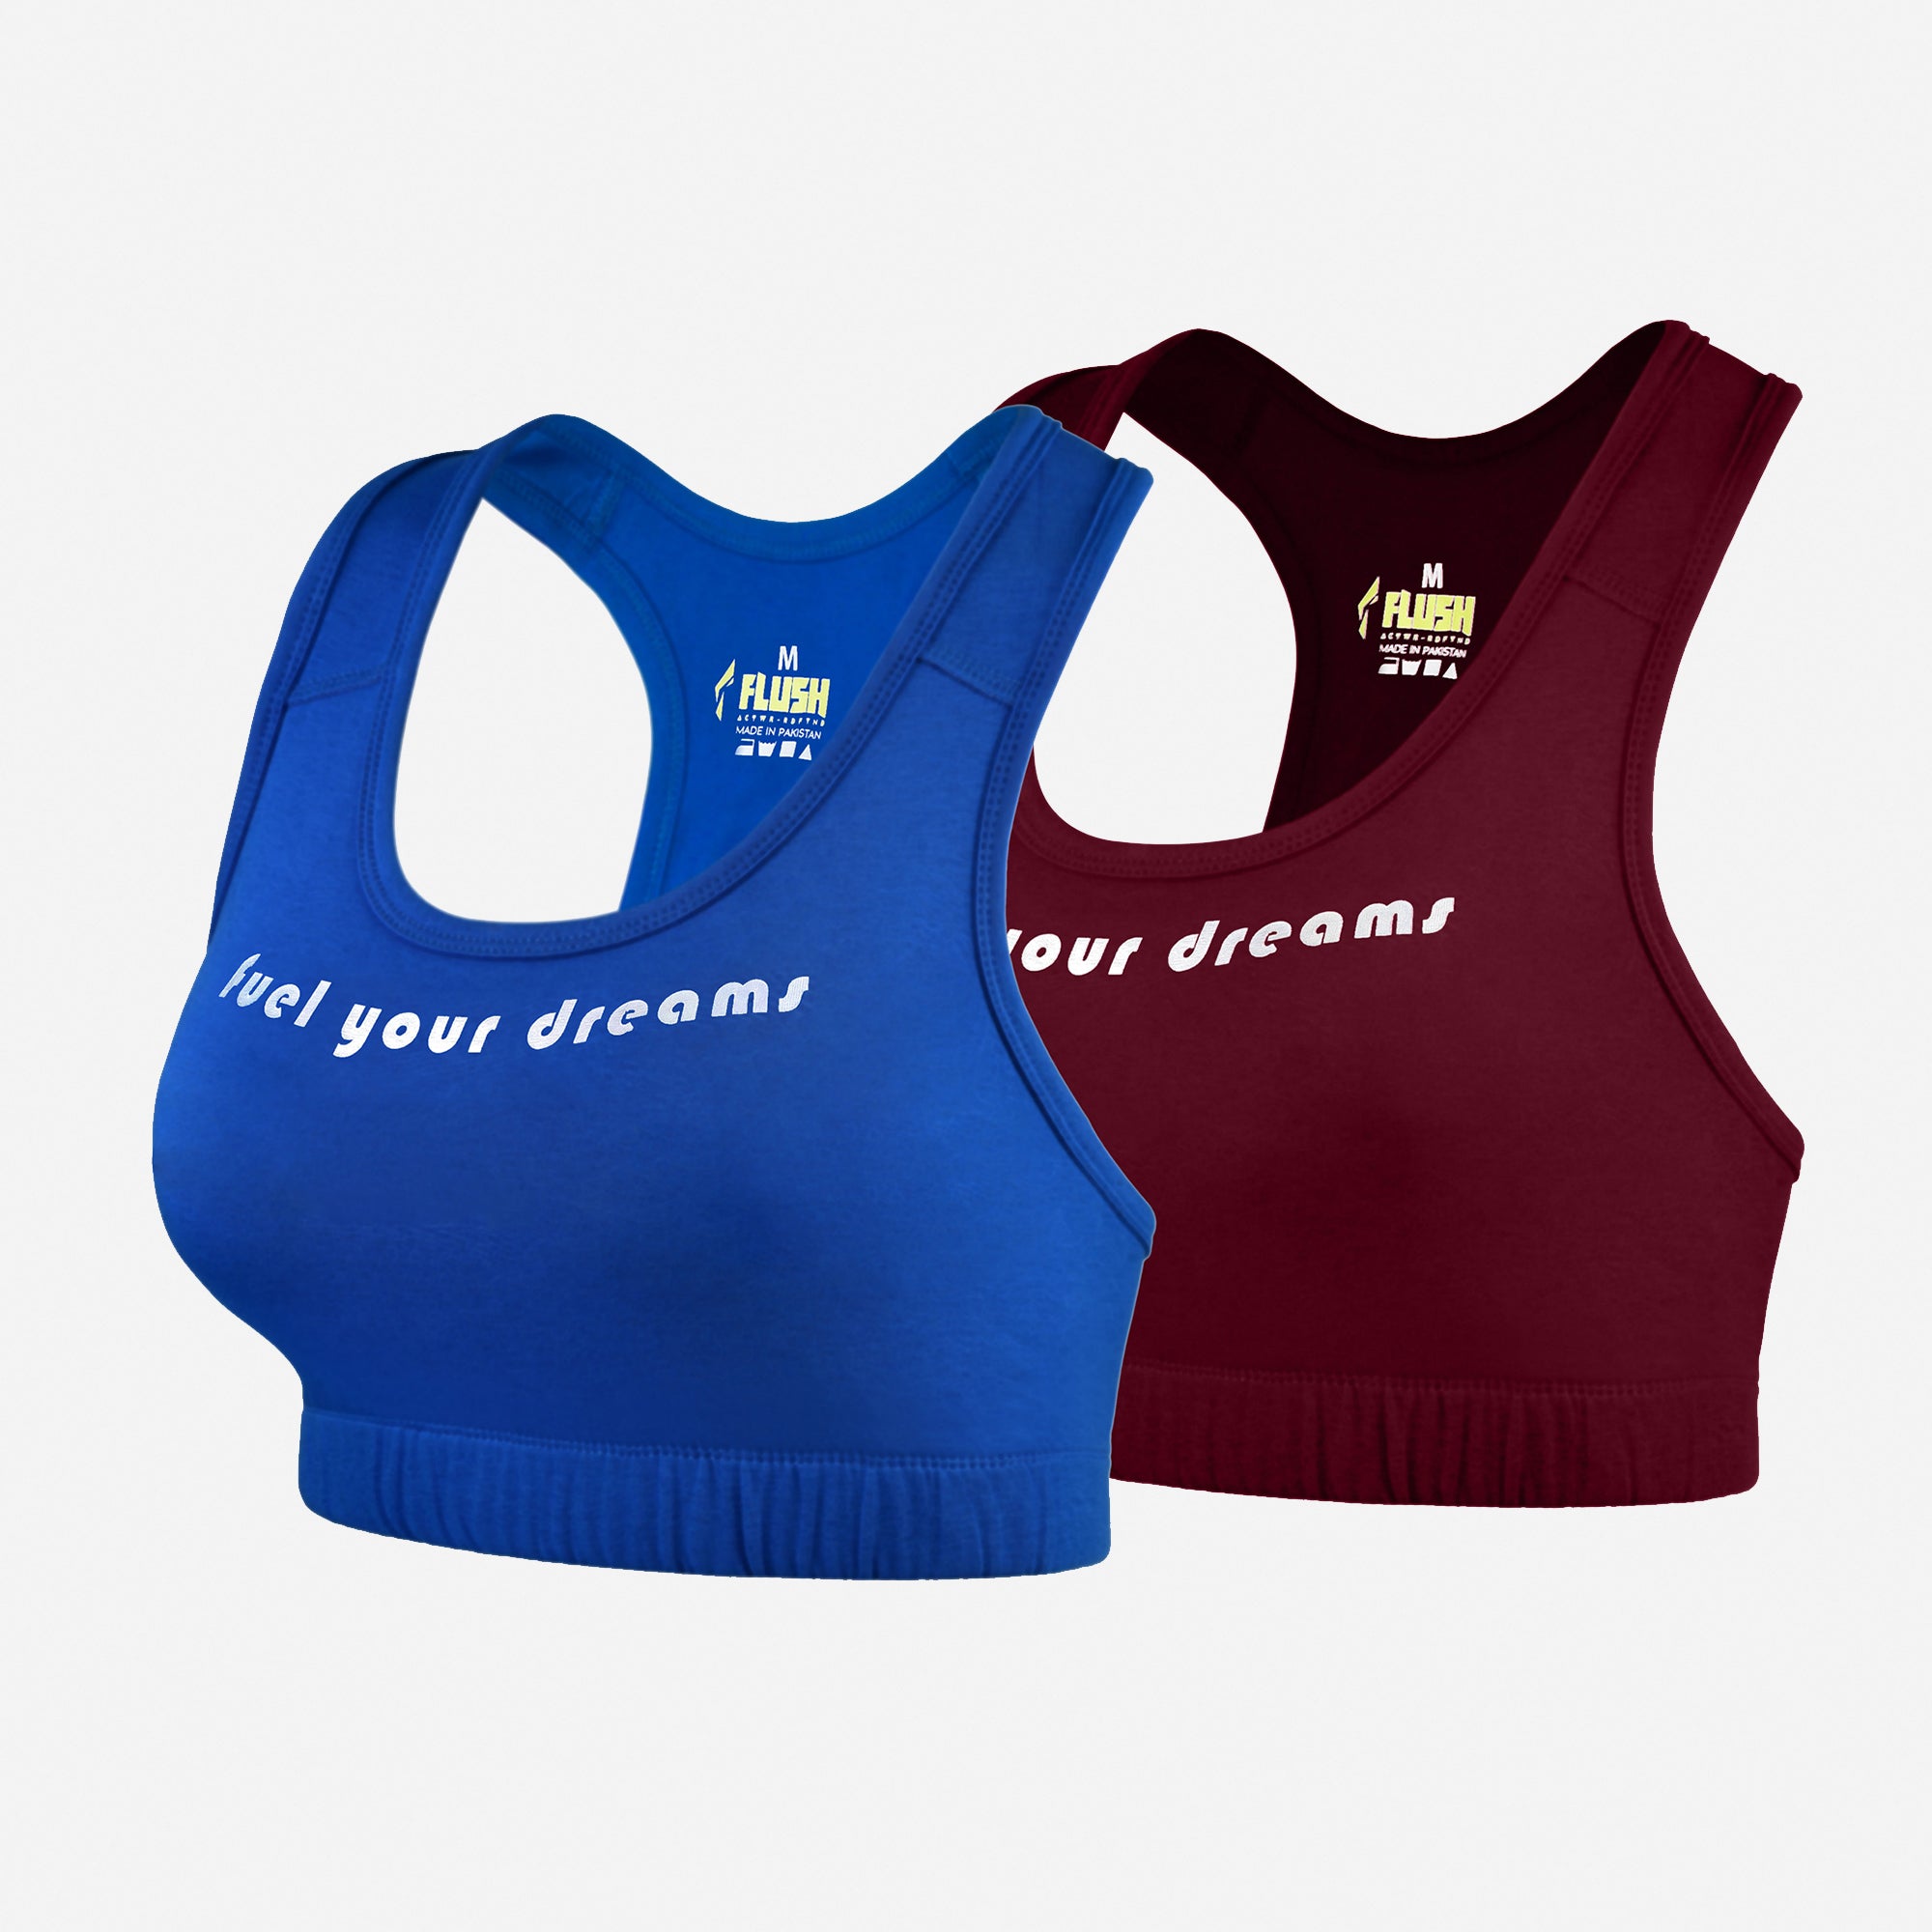 Sports Bra - Buy Sports Bra Online in Pakistan at the Best Prices